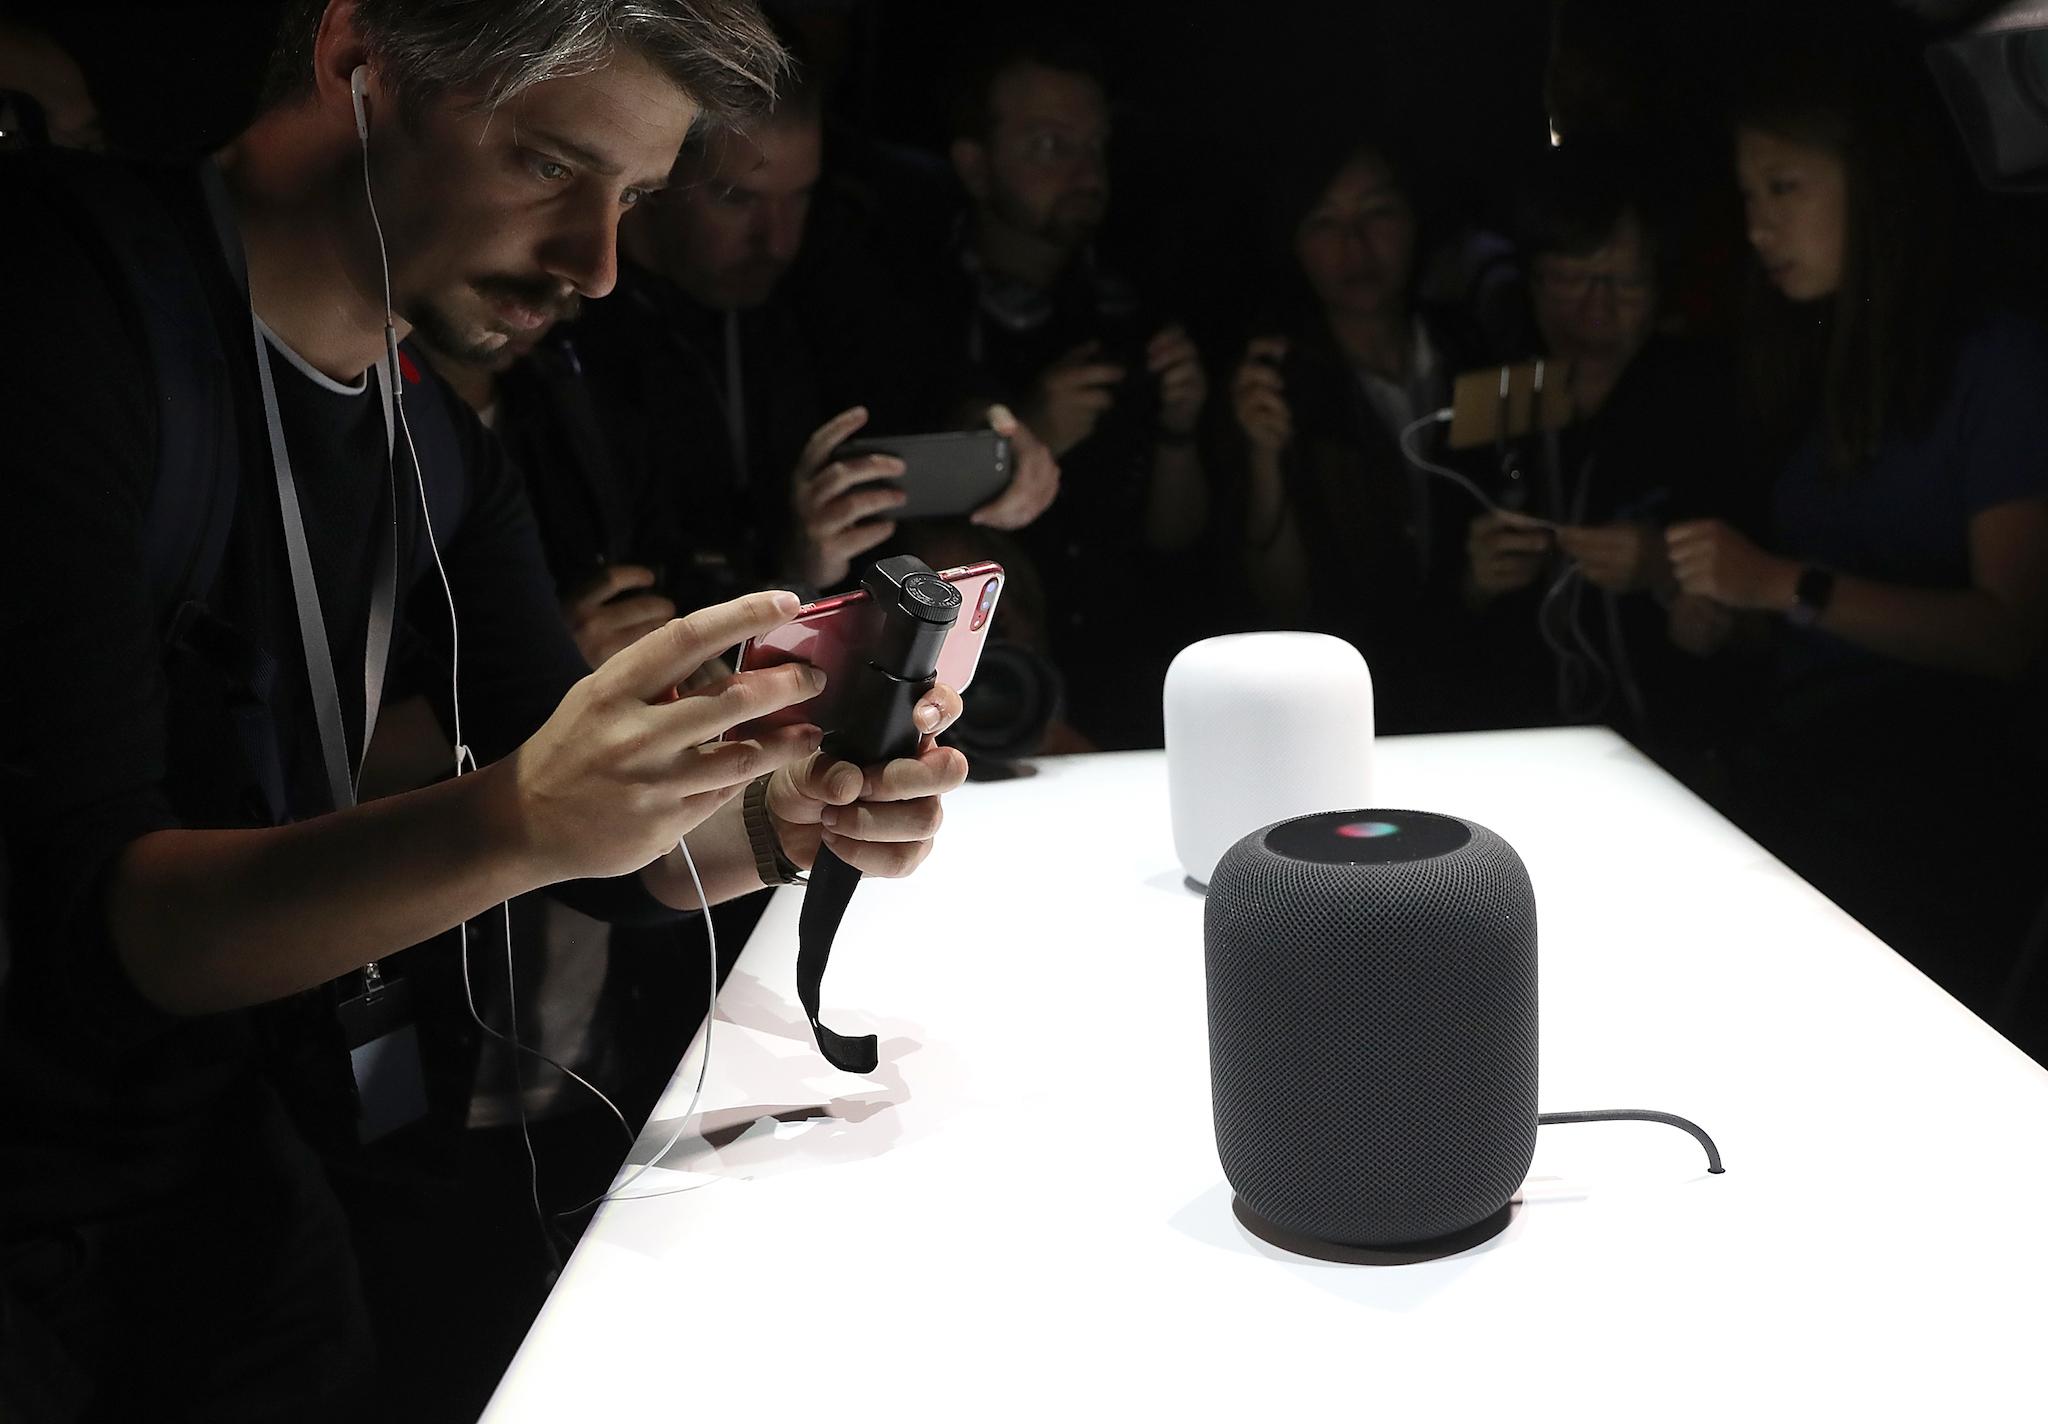 A prototype of Apple's new HomePod is displayed during the 2017 Apple Worldwide Developer Conference (WWDC) at the San Jose Convention Center on June 5, 2017 in San Jose, California